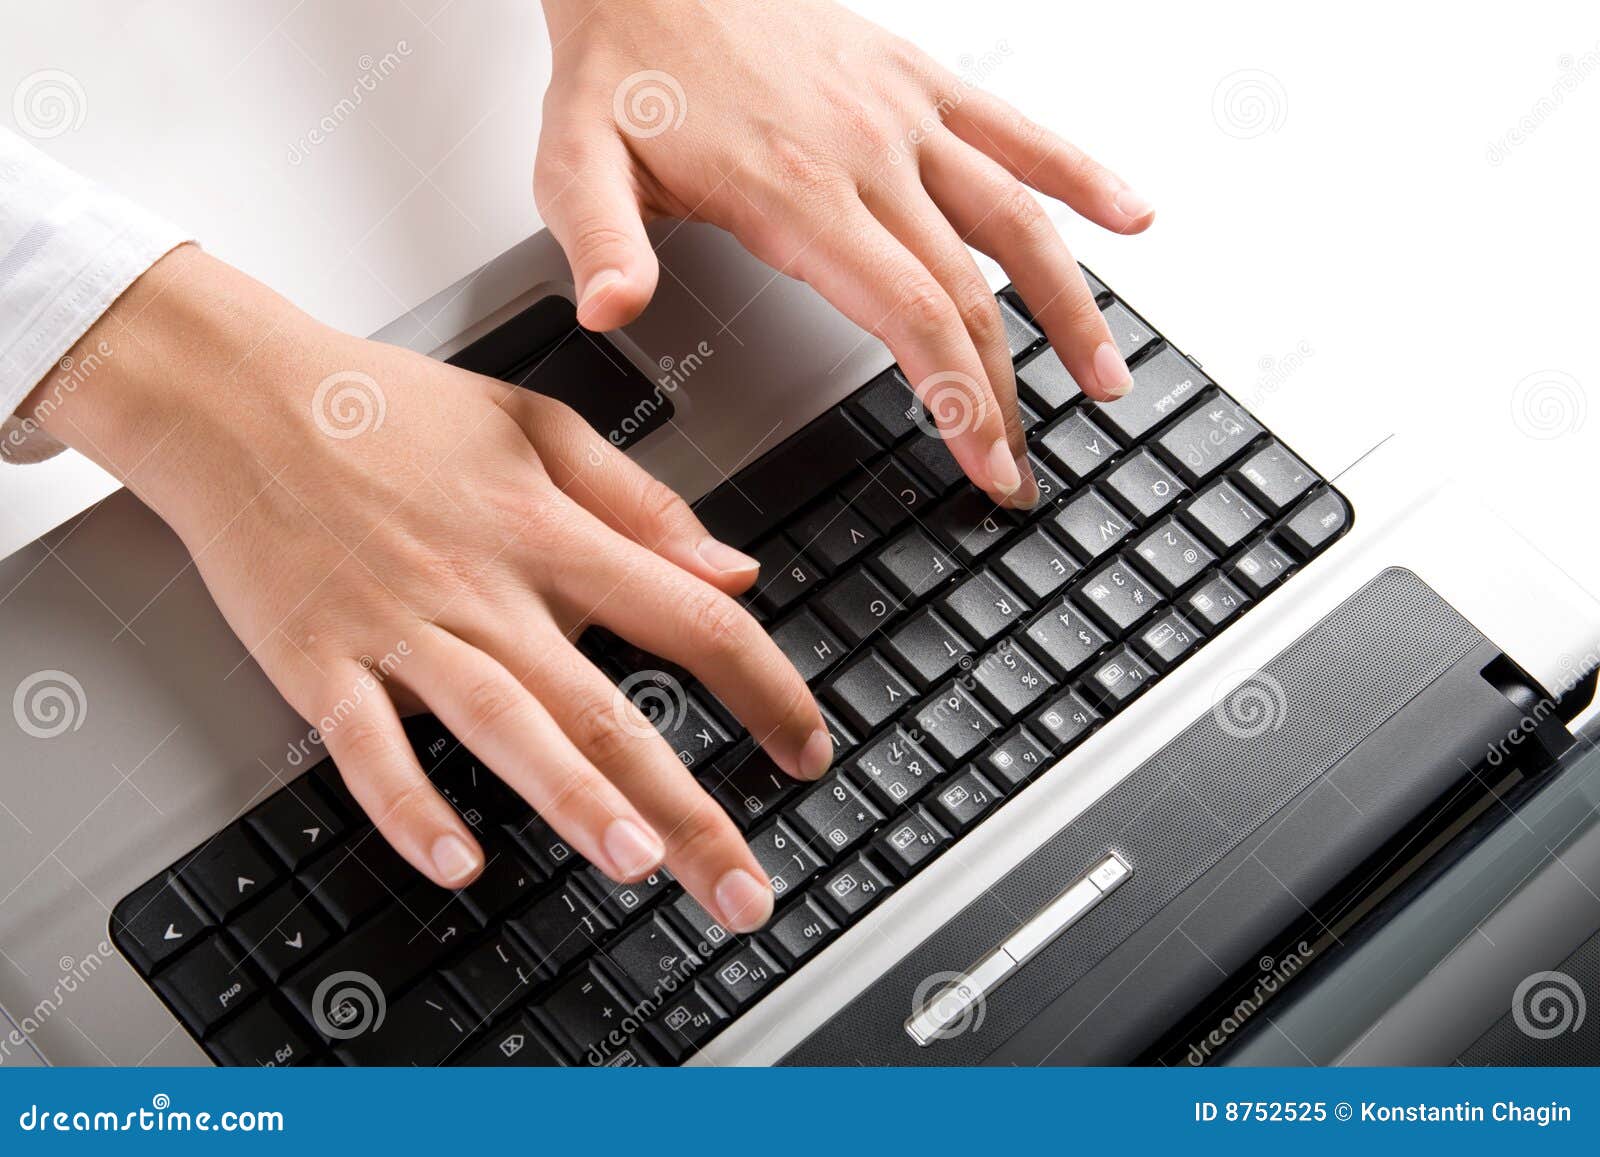 Typing a letter stock image. Image of laptop, portable ...